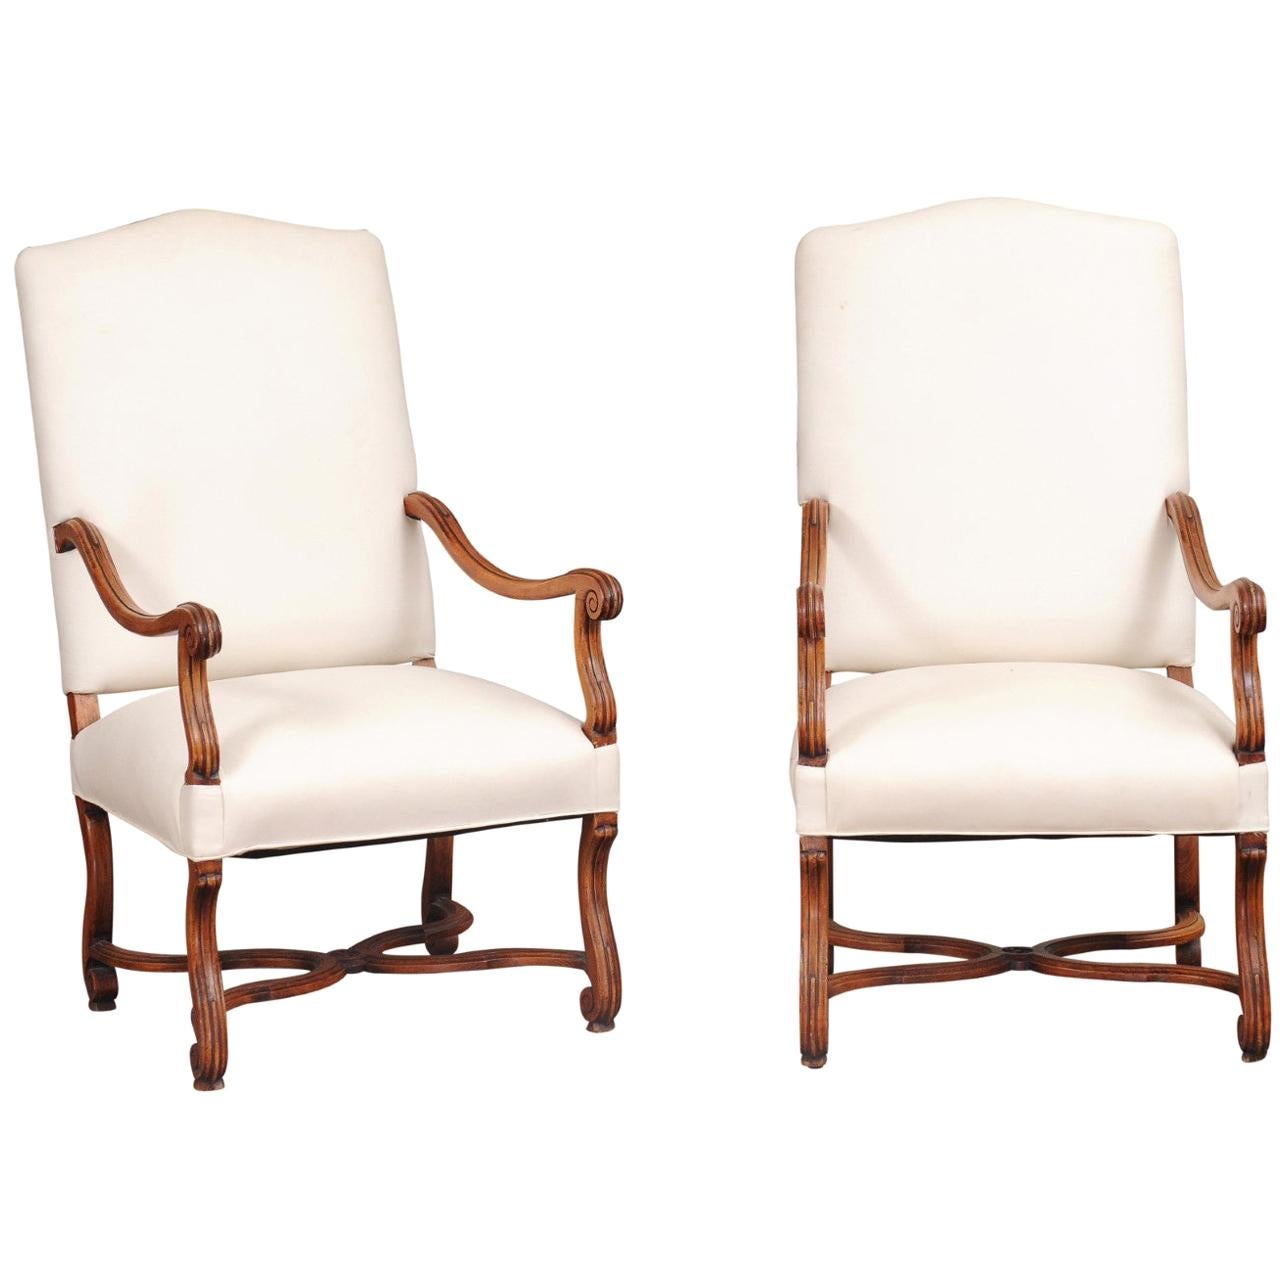 Pair of French 19th Century Louis XIV Style Walnut Fauteuils with New Upholstery